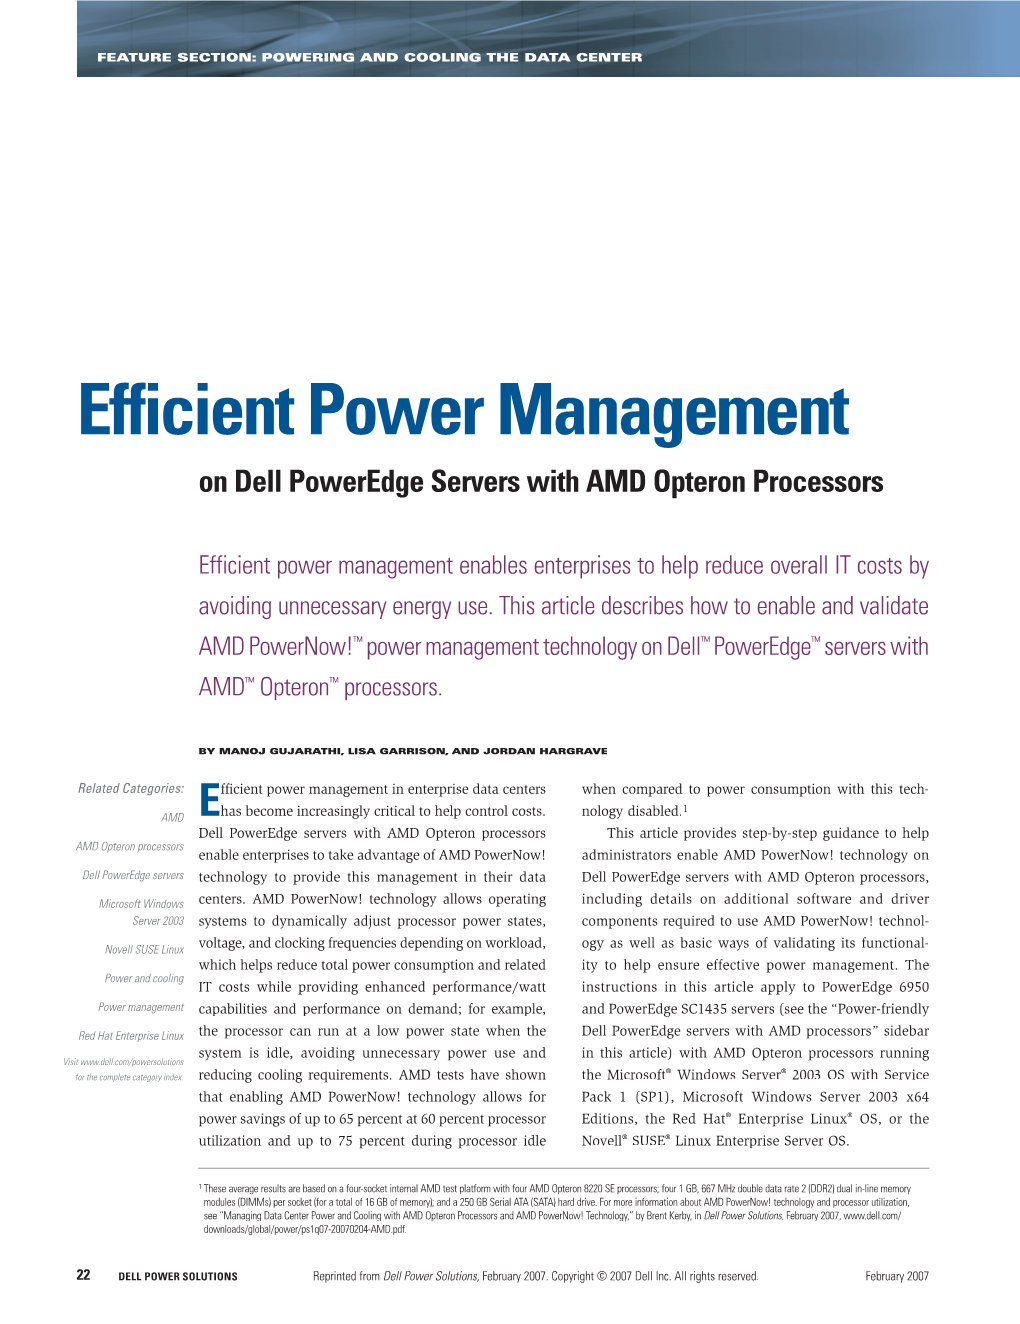 Efficient Power Management on Dell Poweredge Servers with AMD Opteron Processors